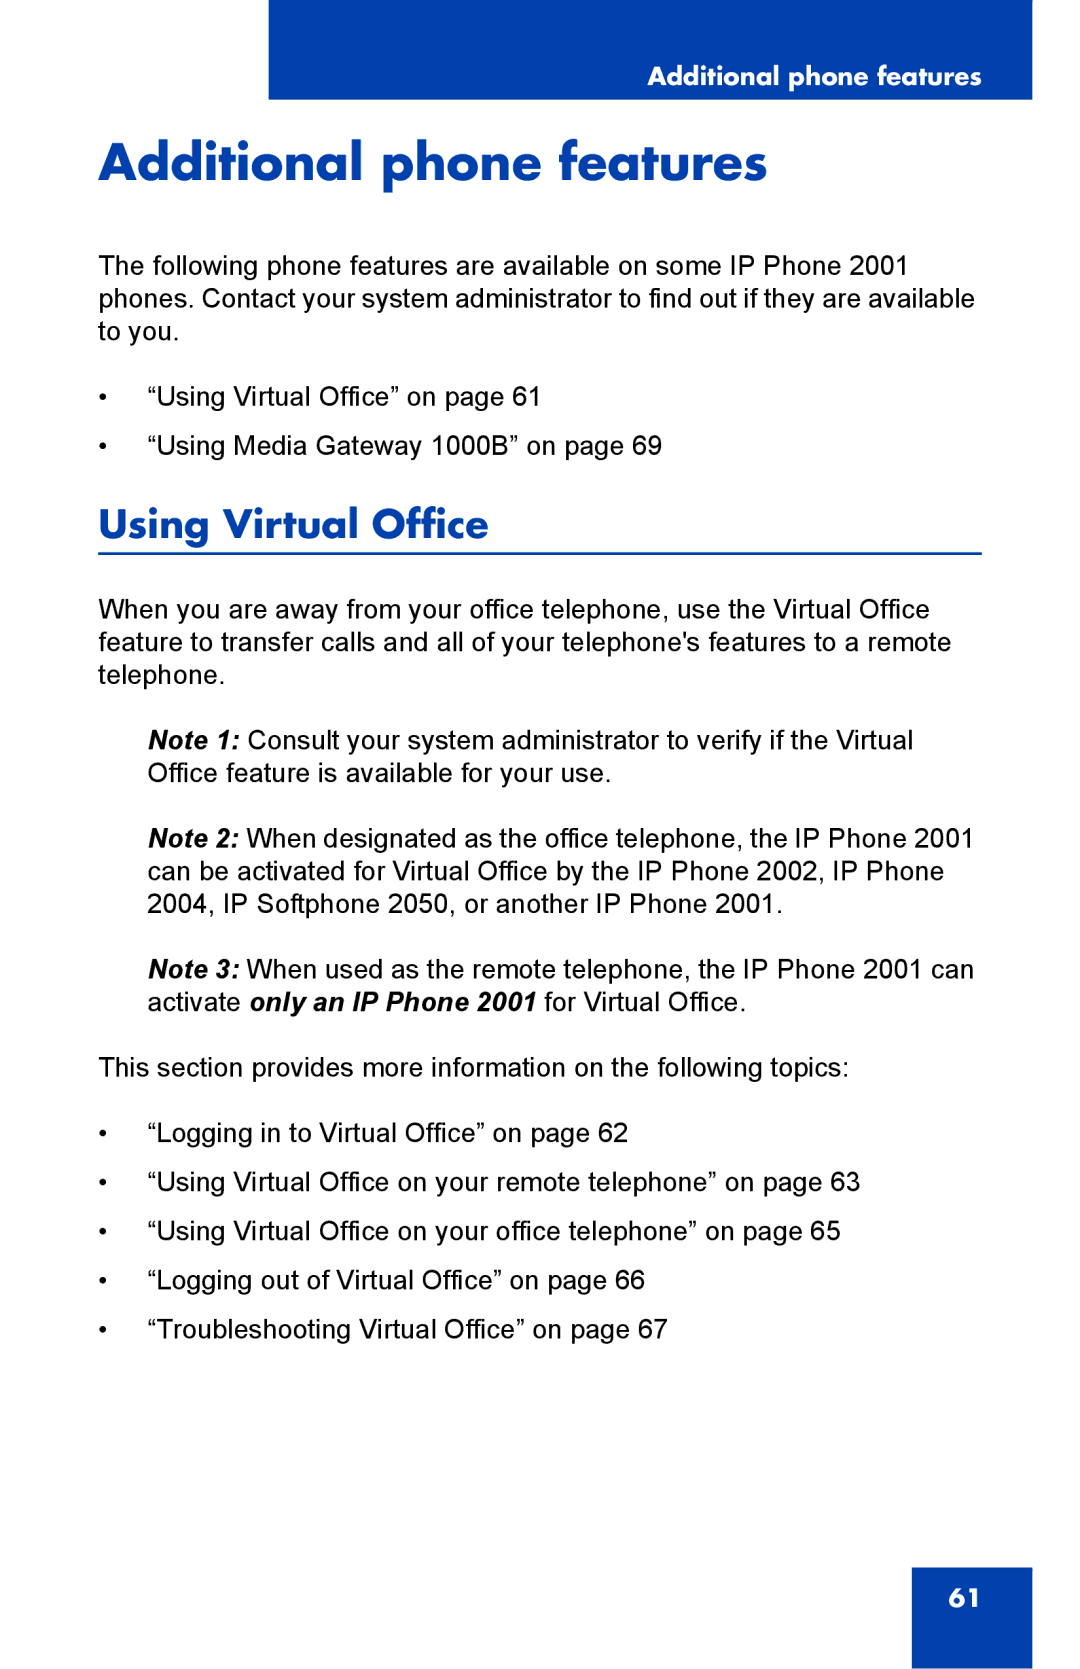 Nortel Networks IP Phone 2001 manual Additional phone features, Using Virtual Office 